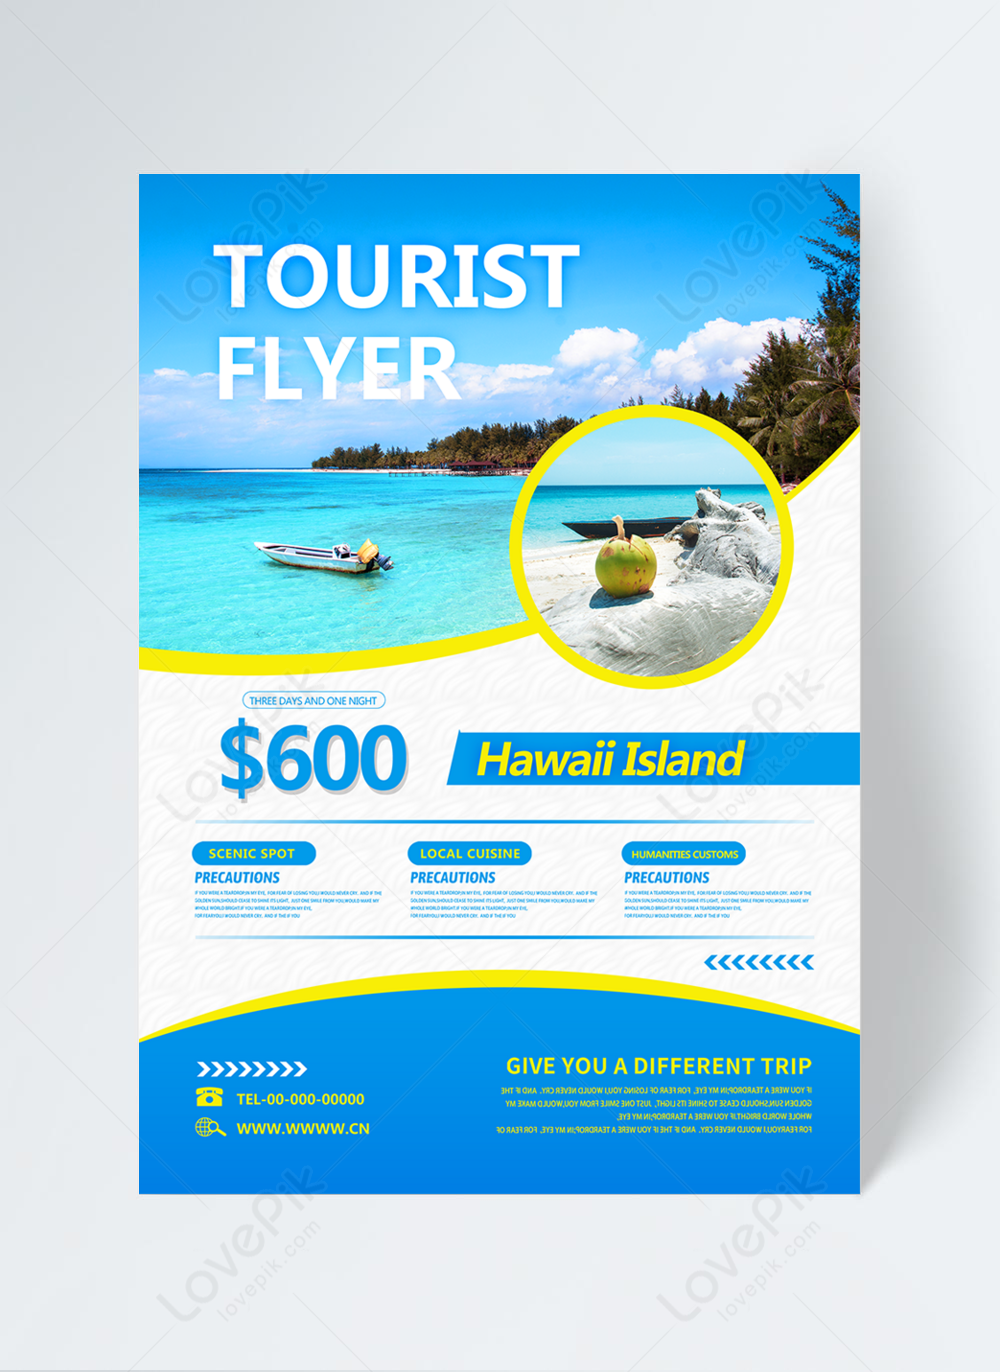 Fashion tourist attraction flyer template image_picture free Throughout Island Brochure Template